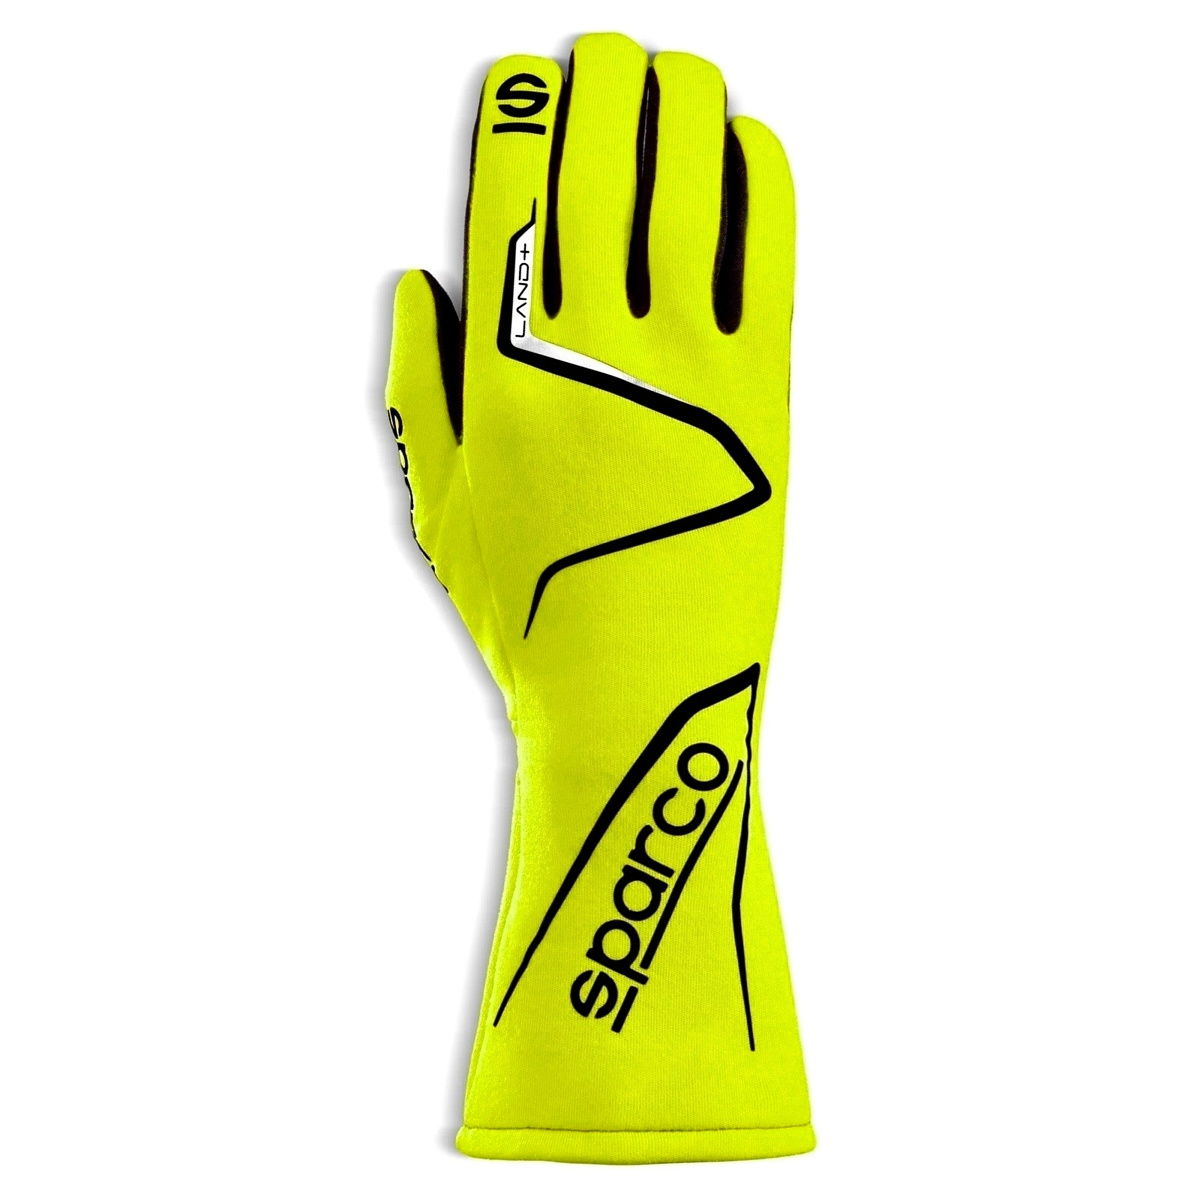 Sparco 00136308GF Driving Gloves, Land, SFI 3.3/5, FIA Approved, Single Layer, Fire Retardant Fabric, Yellow, X-Small, Pair